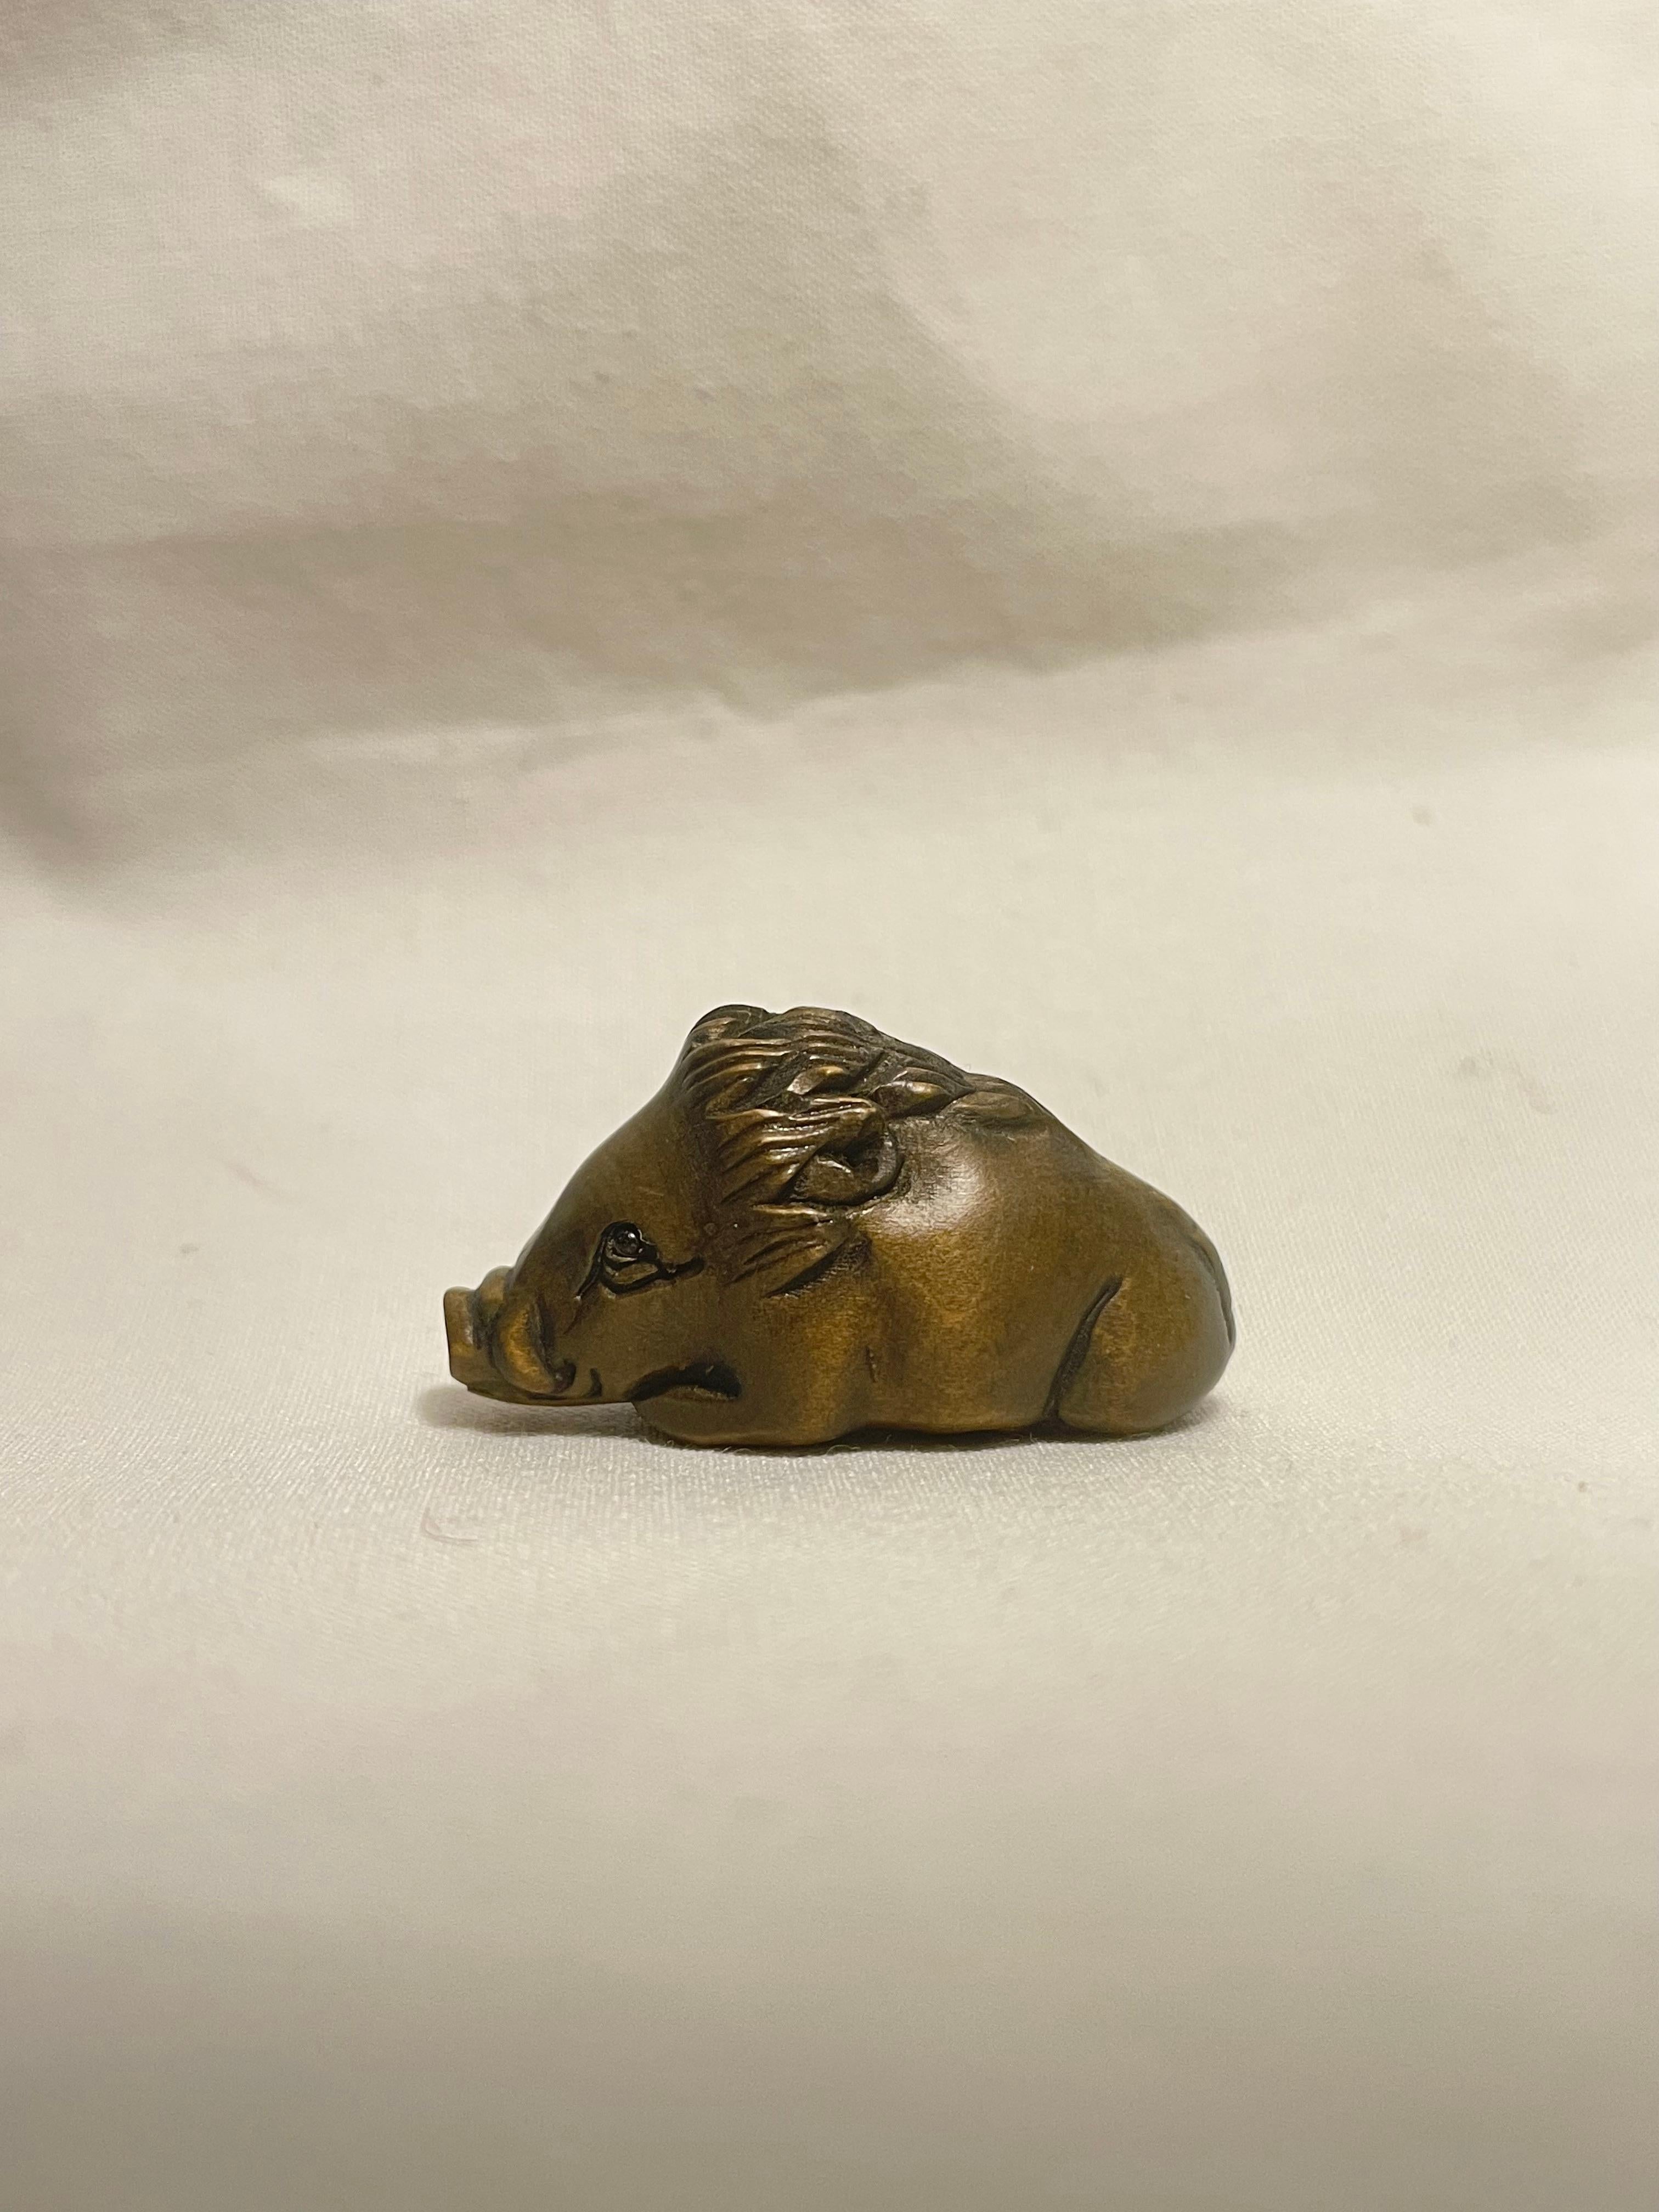 This is an antique netsuke made in Japan around Showa period 1960s.

Dimensions: 3.5 x 1.5 x H2 cm
Sculpture: Wild Boar
Era: 1960s (Showa) 

Netsuke is a miniature sculpture, originating in 17th century Japan.
Initially a simply-carved button